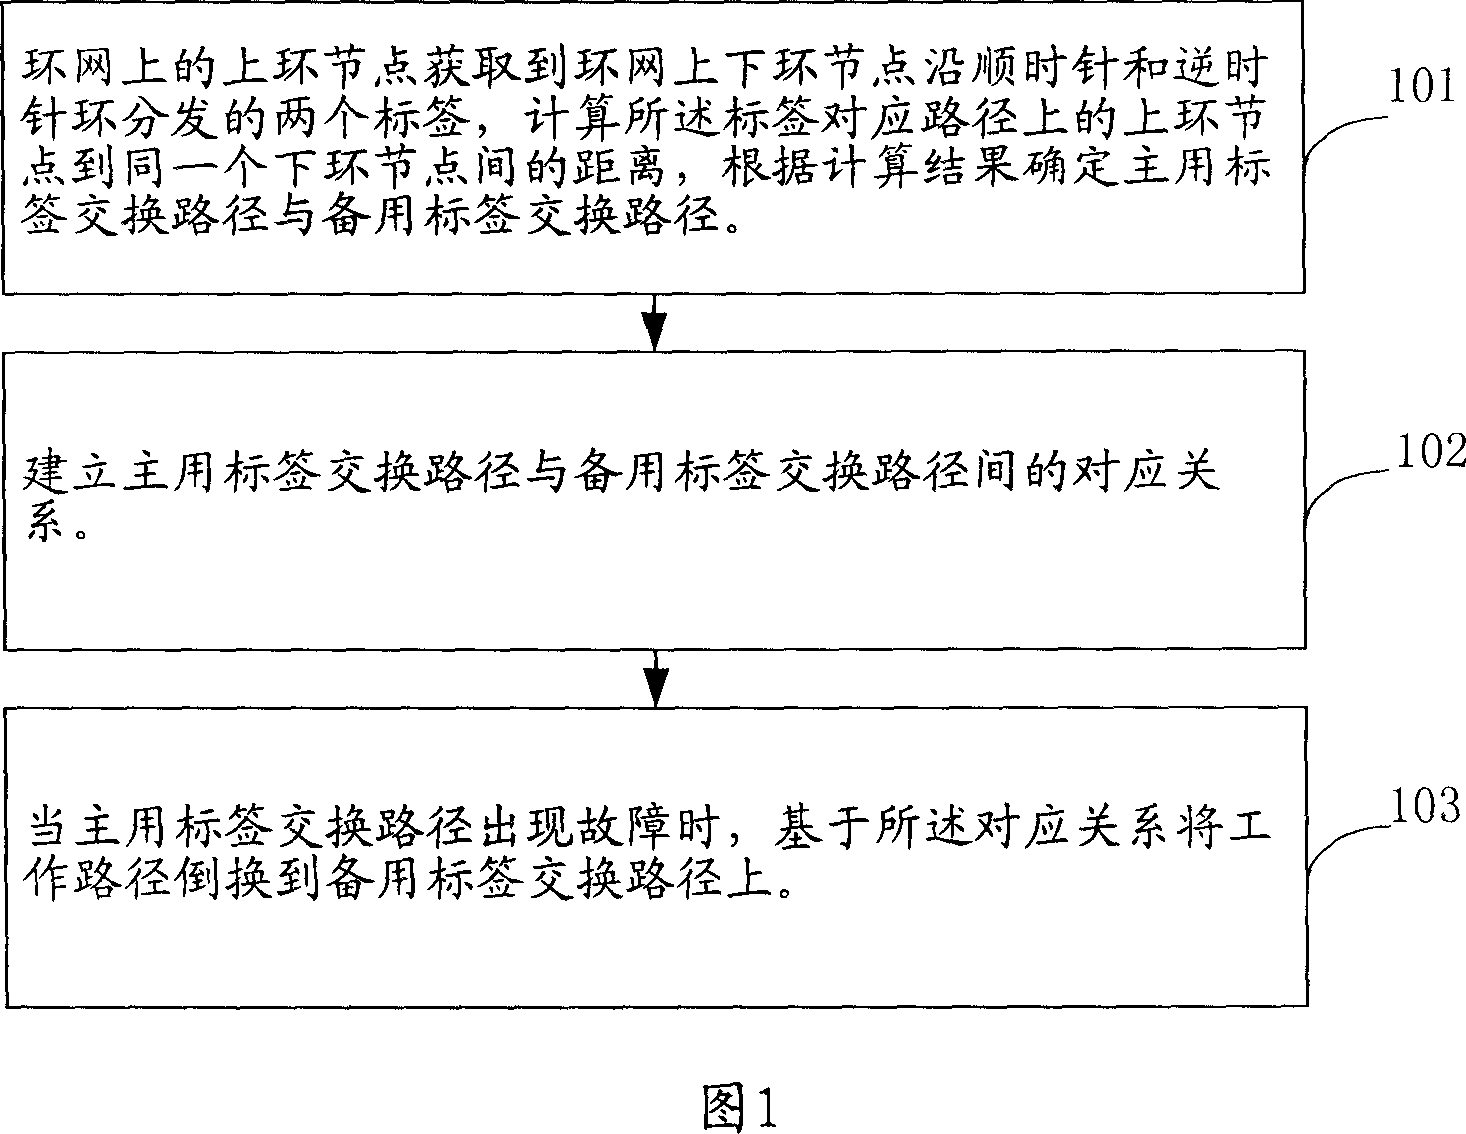 Method for distributing tag, computing route distance and implementing back-up switching in ring network by multiprotocol tag